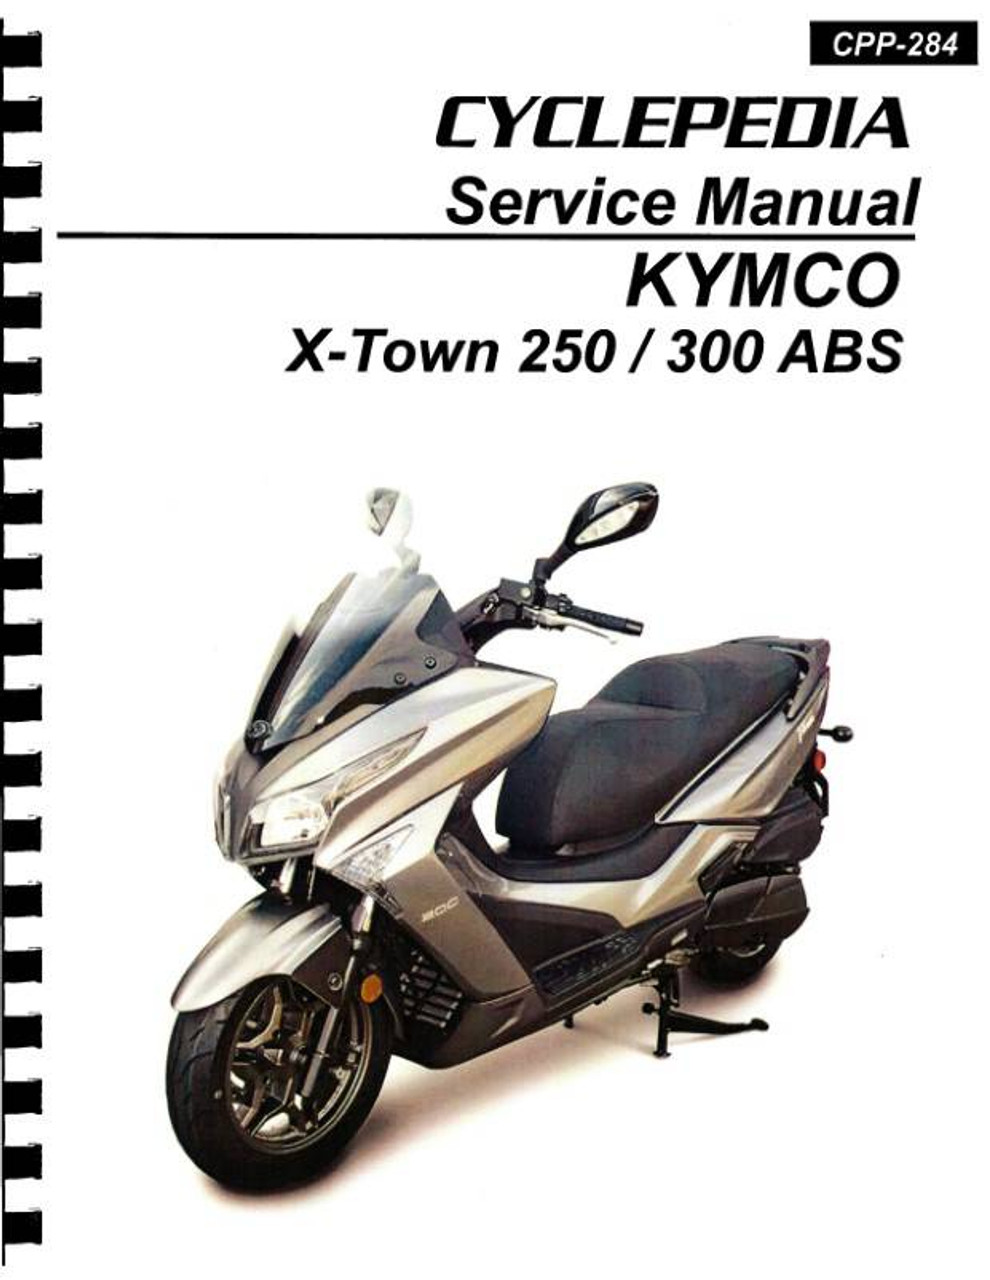 KYMCO X-Town 250 / 300 Scooter Service Manual